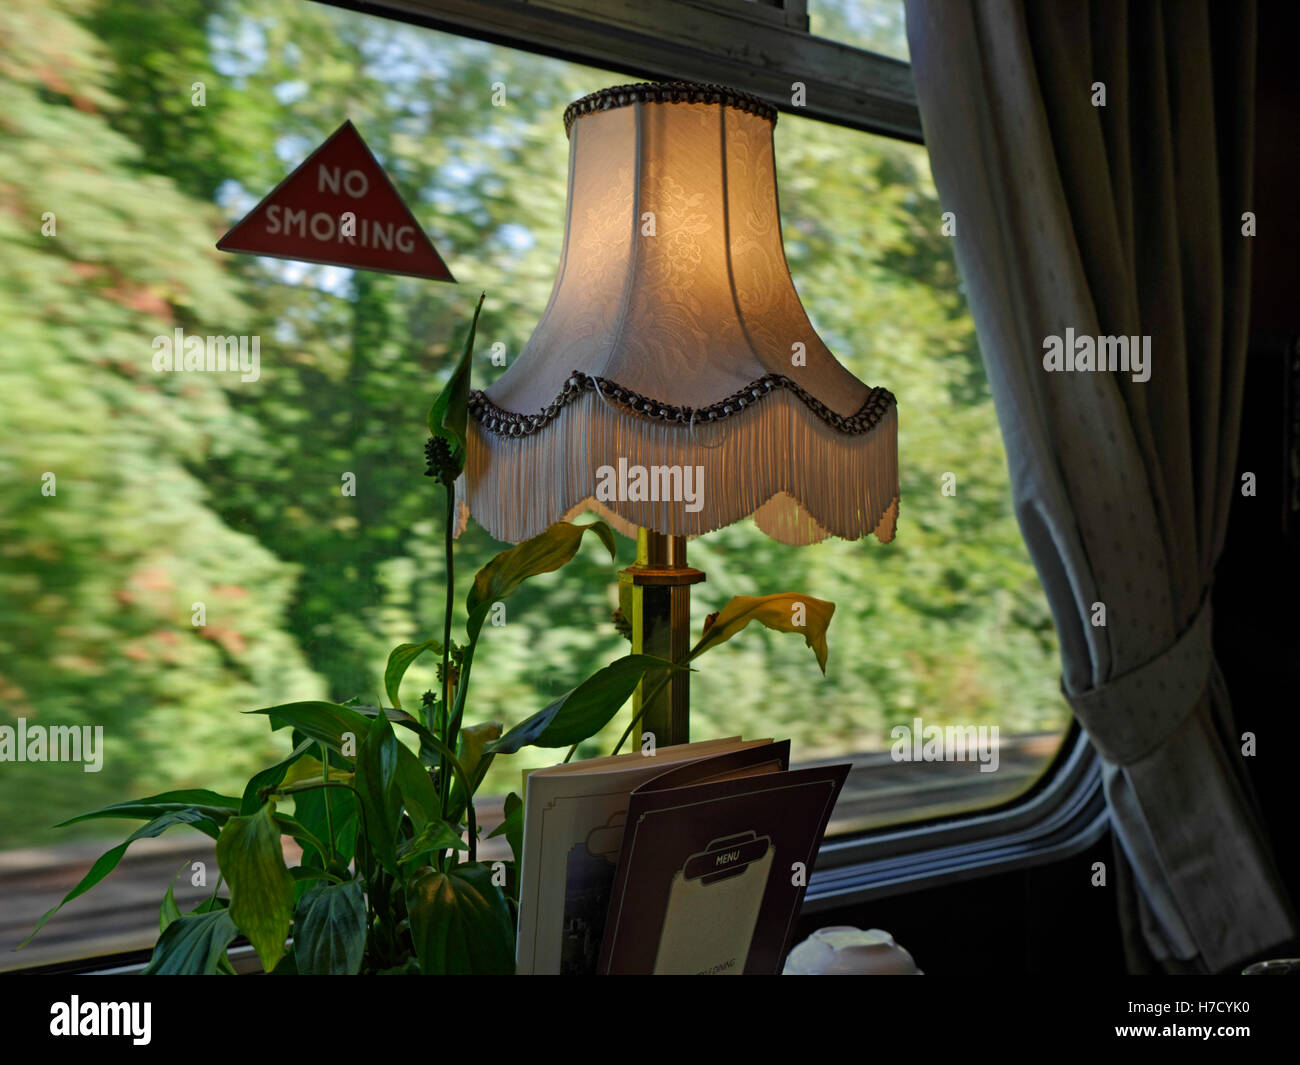 Pullman first class rail travel compartment with old style lamp on dining table with menus and speed blurred background Stock Photo